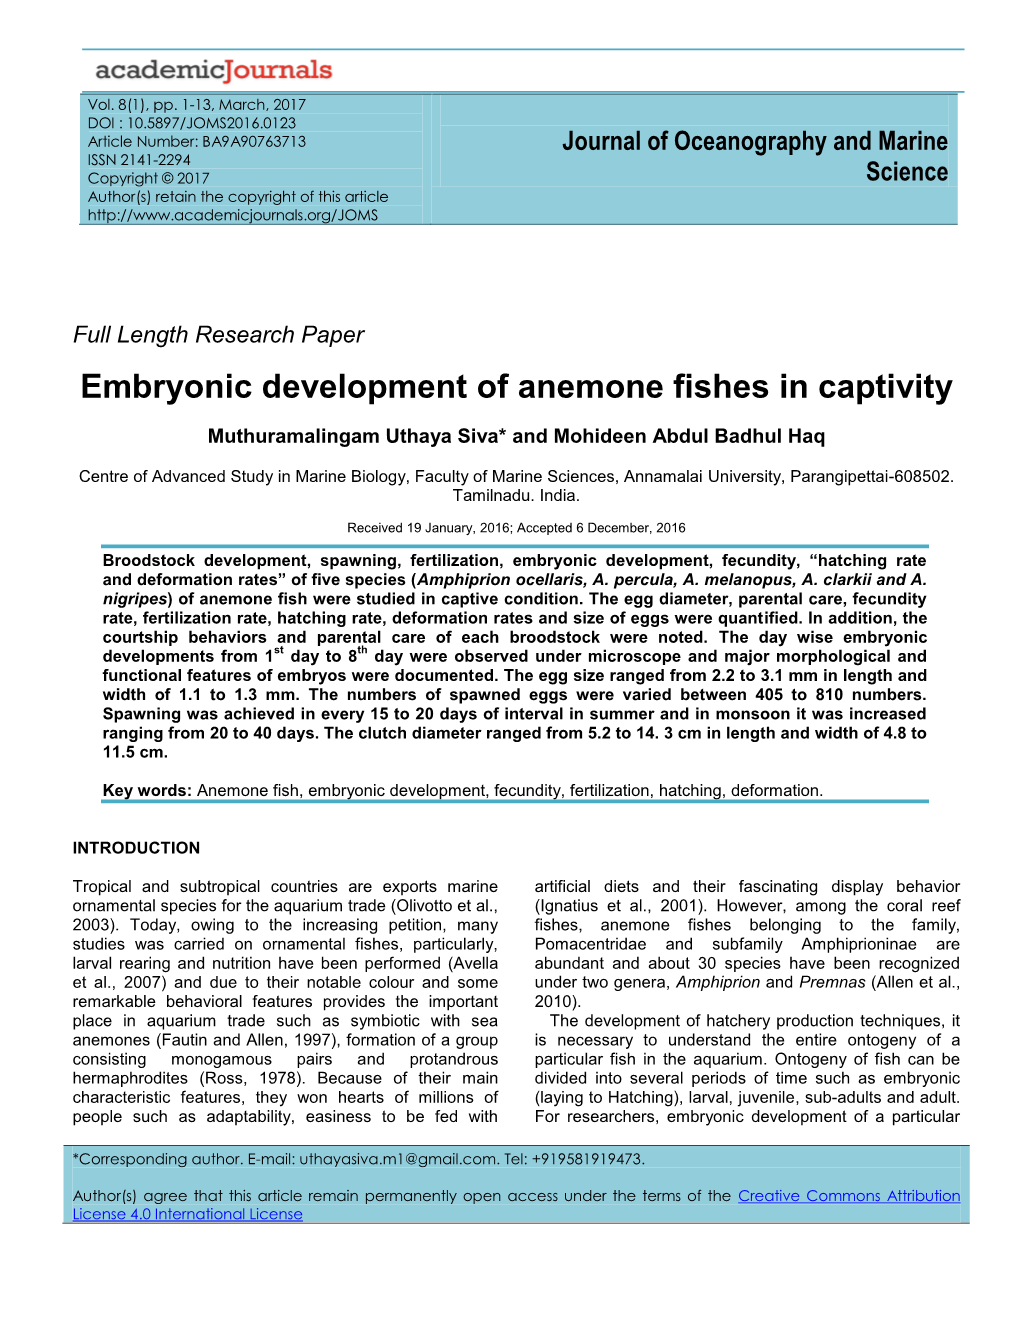 Embryonic Development of Anemone Fishes in Captivity